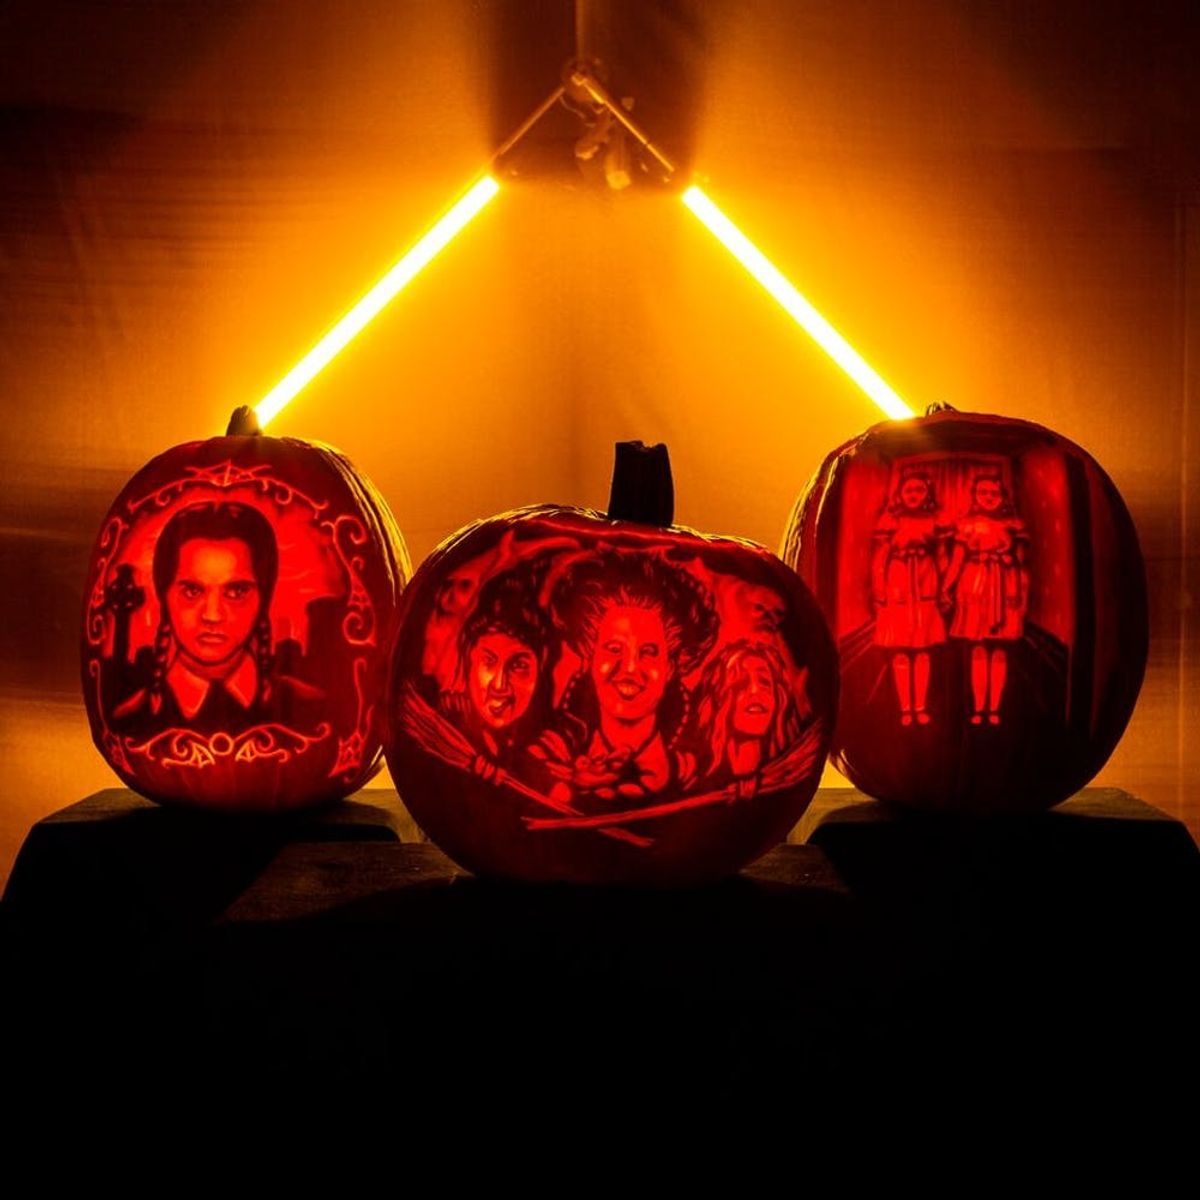 Watch This Mesmerizing Pumpkin Carving Video of the Sanderson Sisters, Wednesday Addams, and the Grady Twins